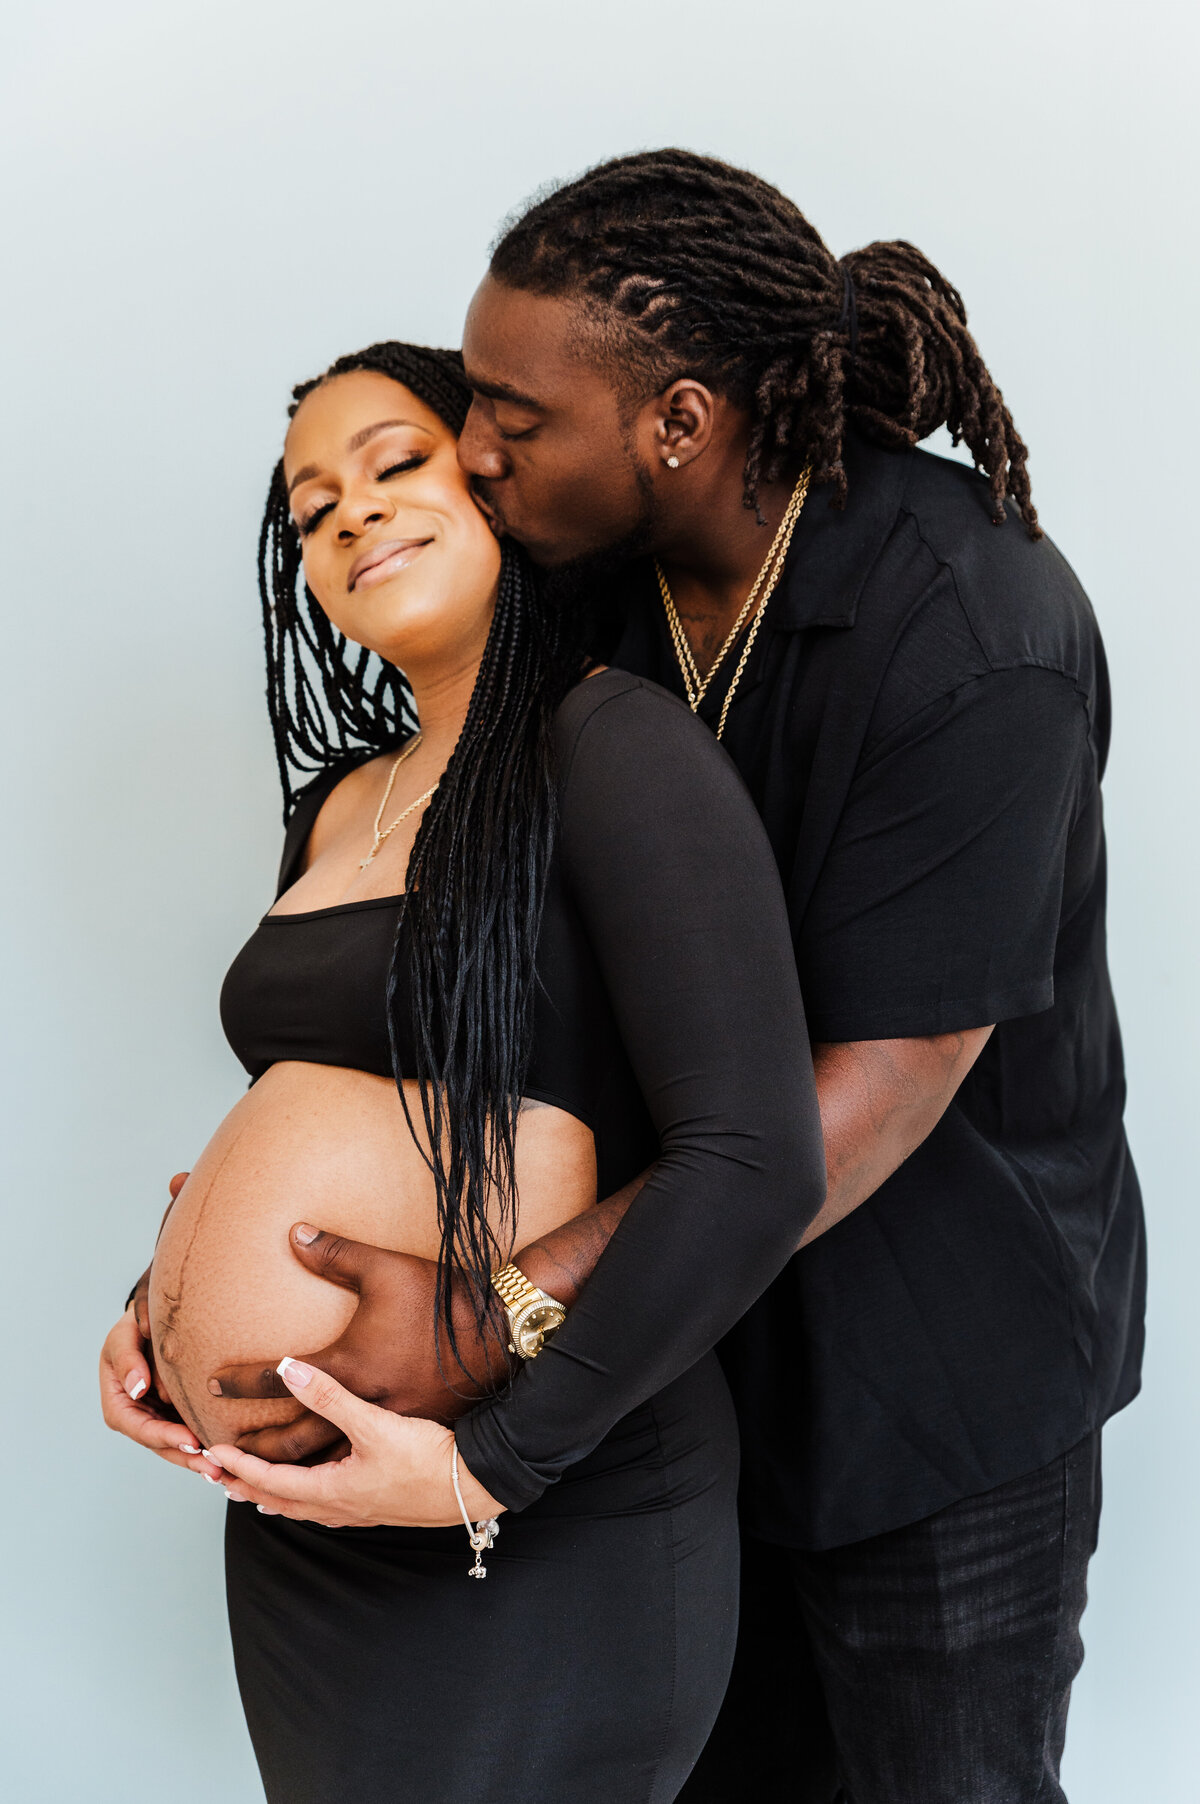 Captivating Maternity Photoshoot Experience at The Lumen Room Studio in Fort Worth